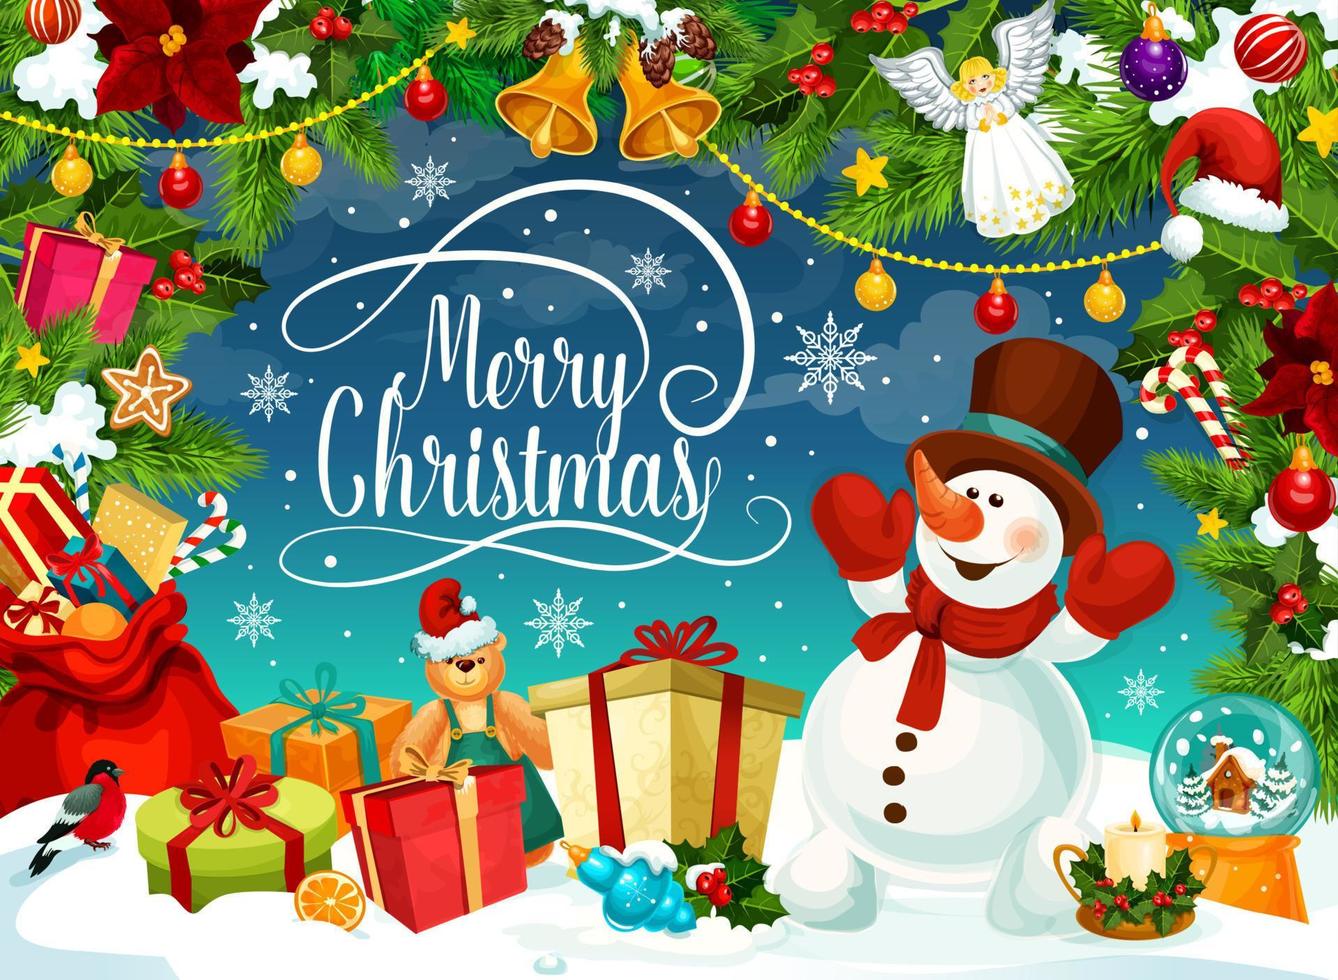 Merry Christmas poster with snowman and gift boxes vector